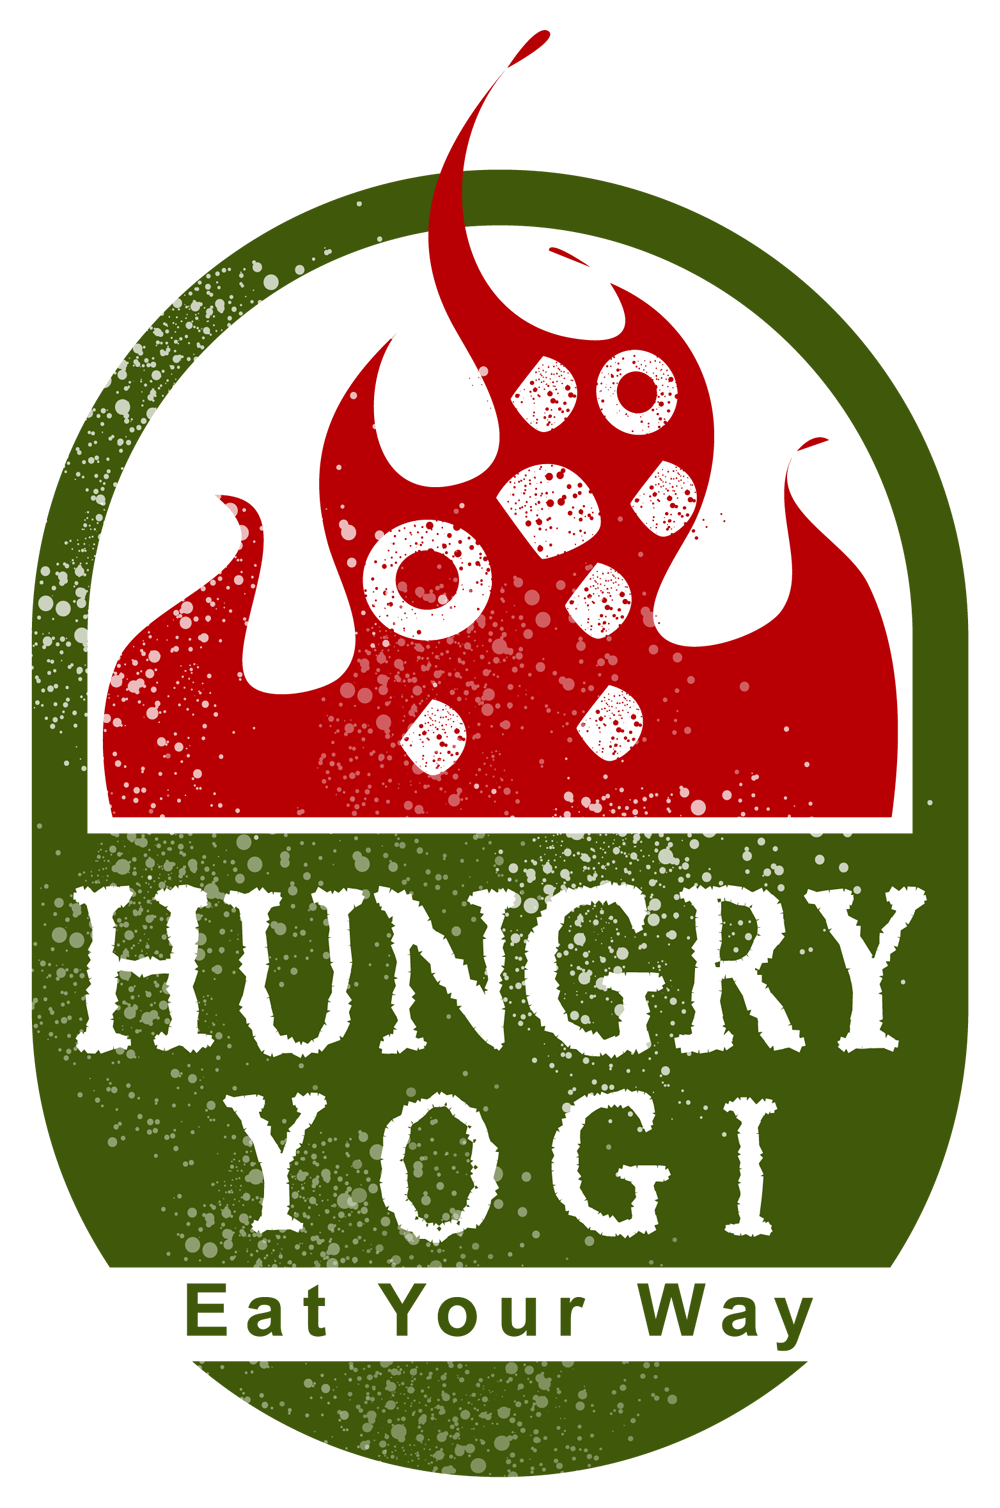 Red and Green Food Logo - Food logo design for a brand new kitchen. Hungry Yogi. Eat your way ...